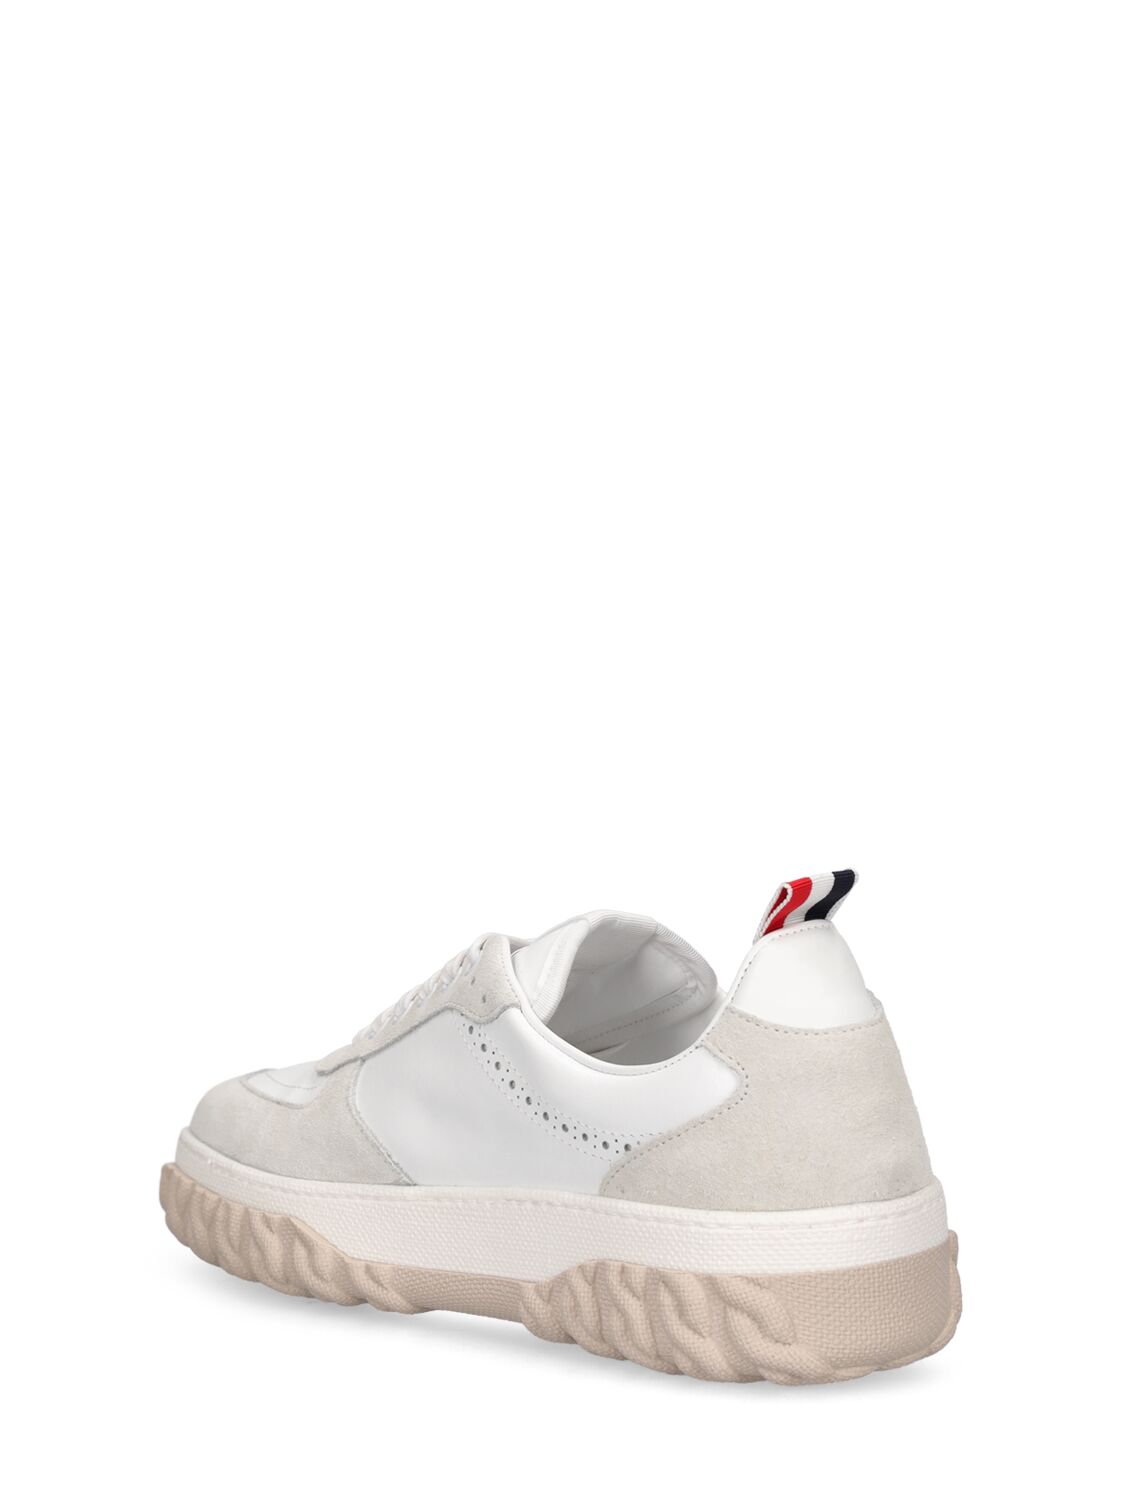 Shop Thom Browne Letterman Sneakers W/ Cable-knit Sole In Tonal White Fun